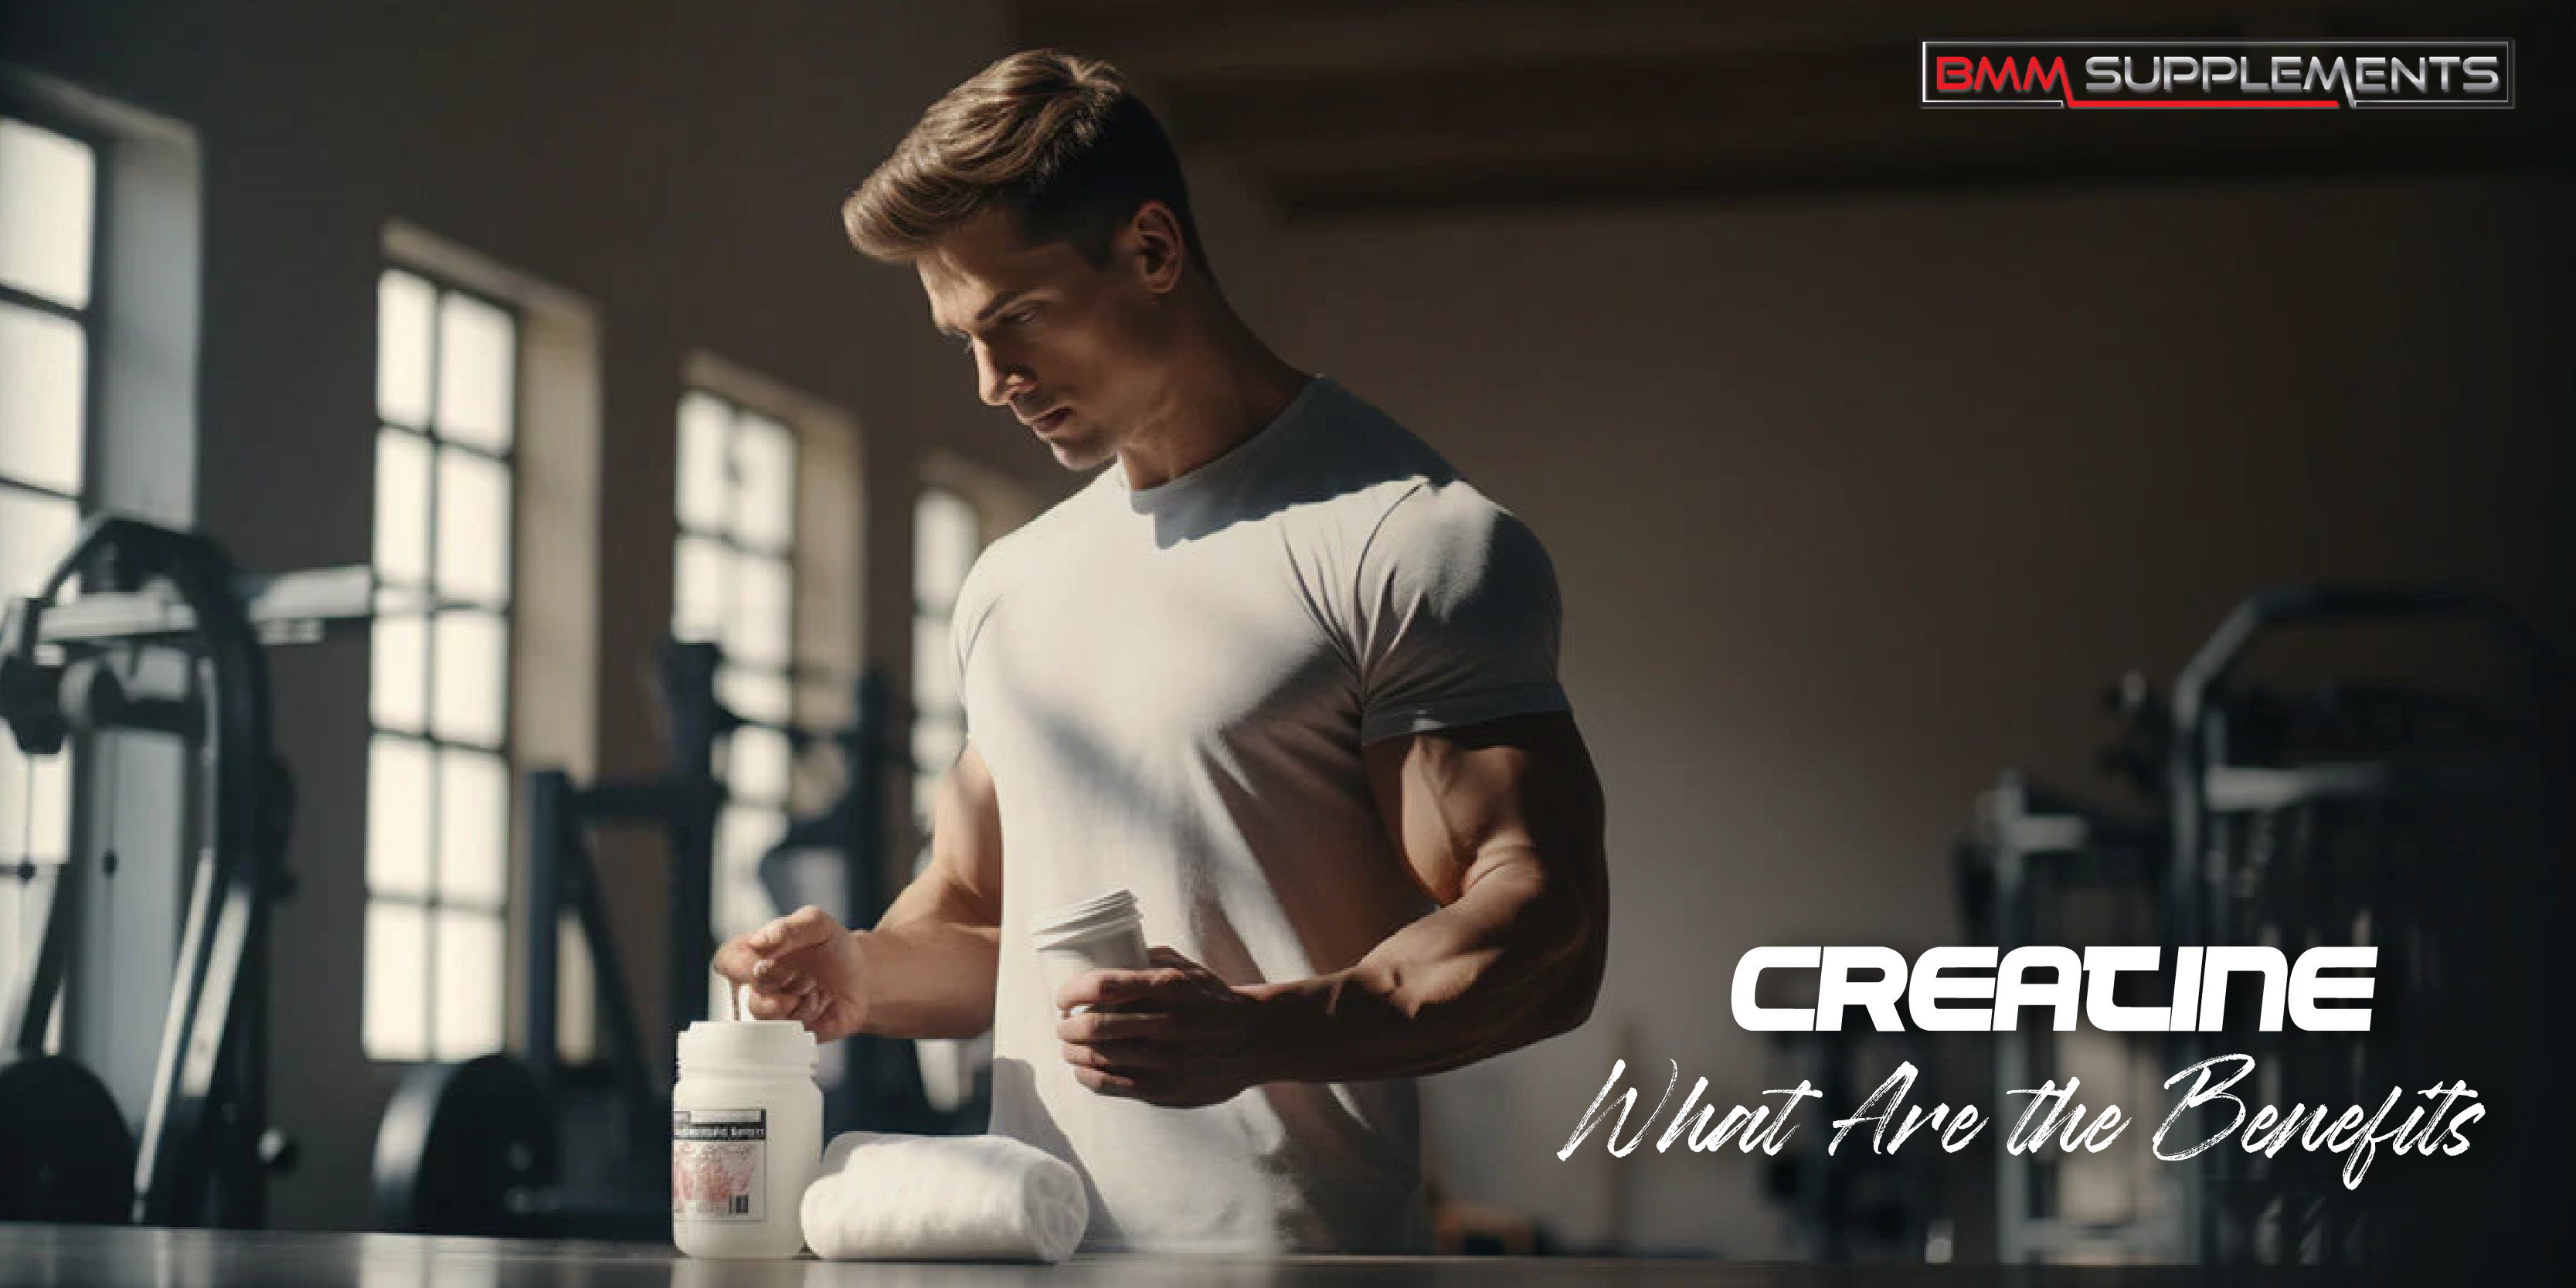 Creatine: What Are the Benefits